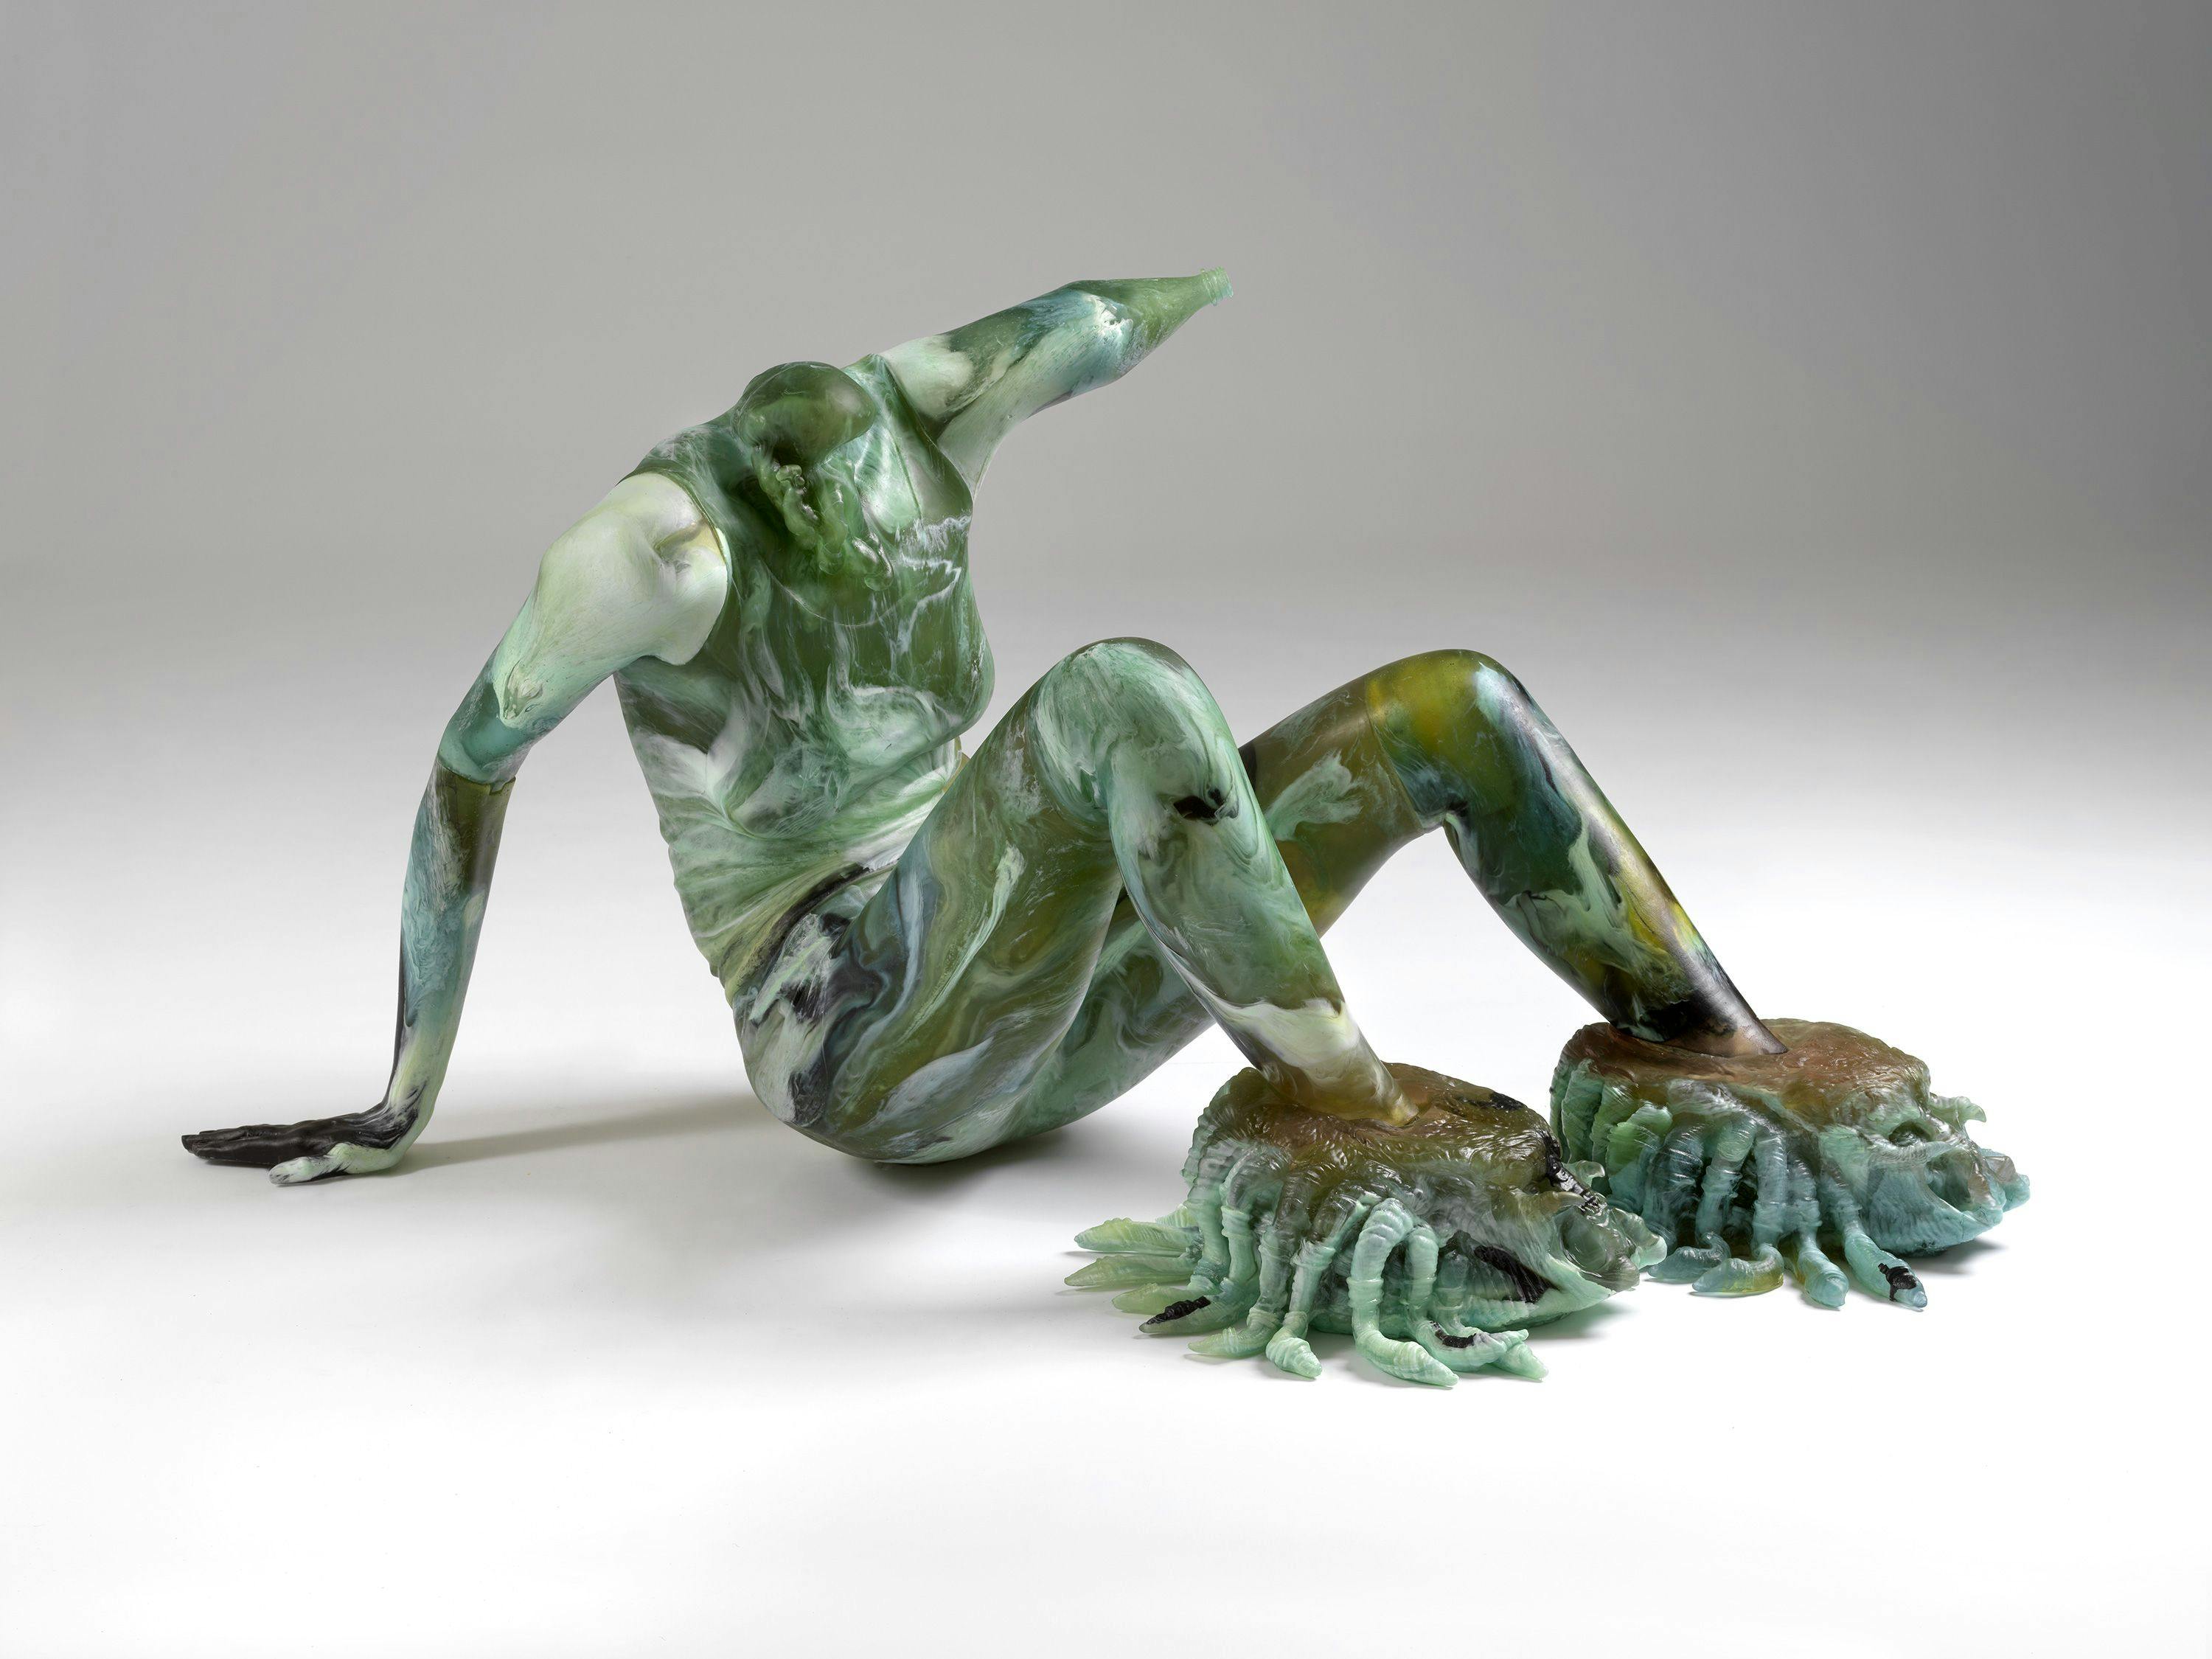 A sculpture by Andra Ursuţa, titled ﻿Predators 'R Us, dated 2022.